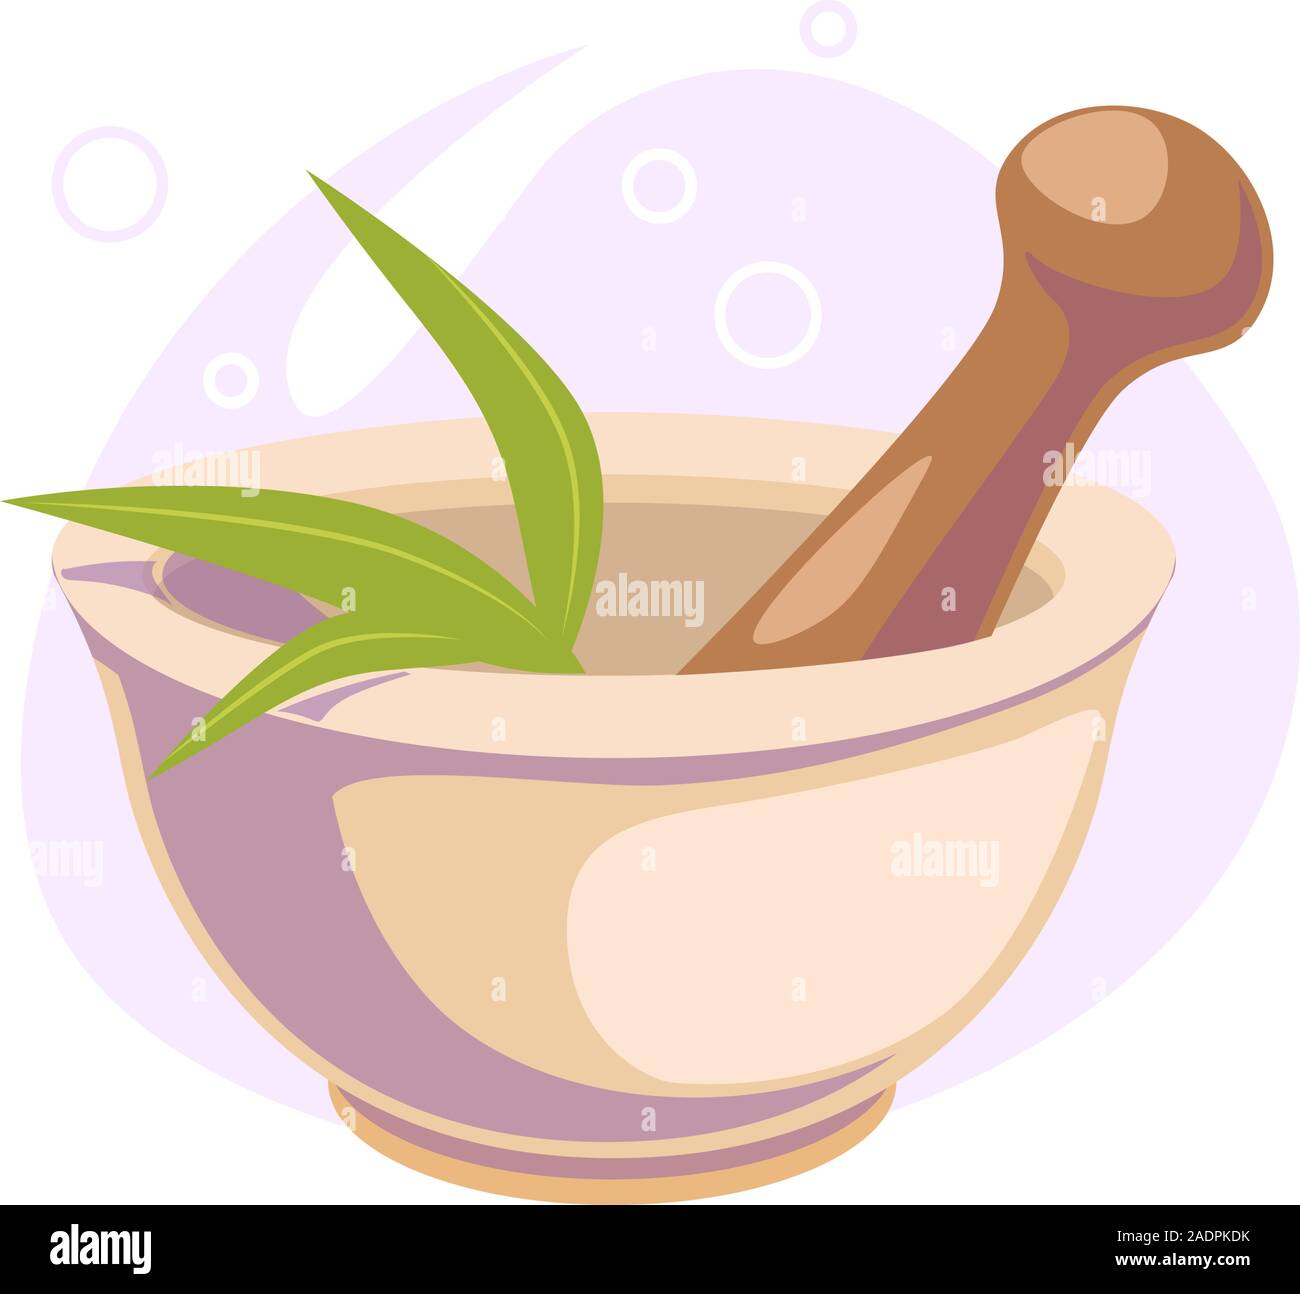 mortar and pestle cartoon flat icon. Spa, wellness, chemistry, pharmaceutical concept Illustration for social media design. Nature Health care Vector isolated object white background. Cosmetic symbol. Stock Vector